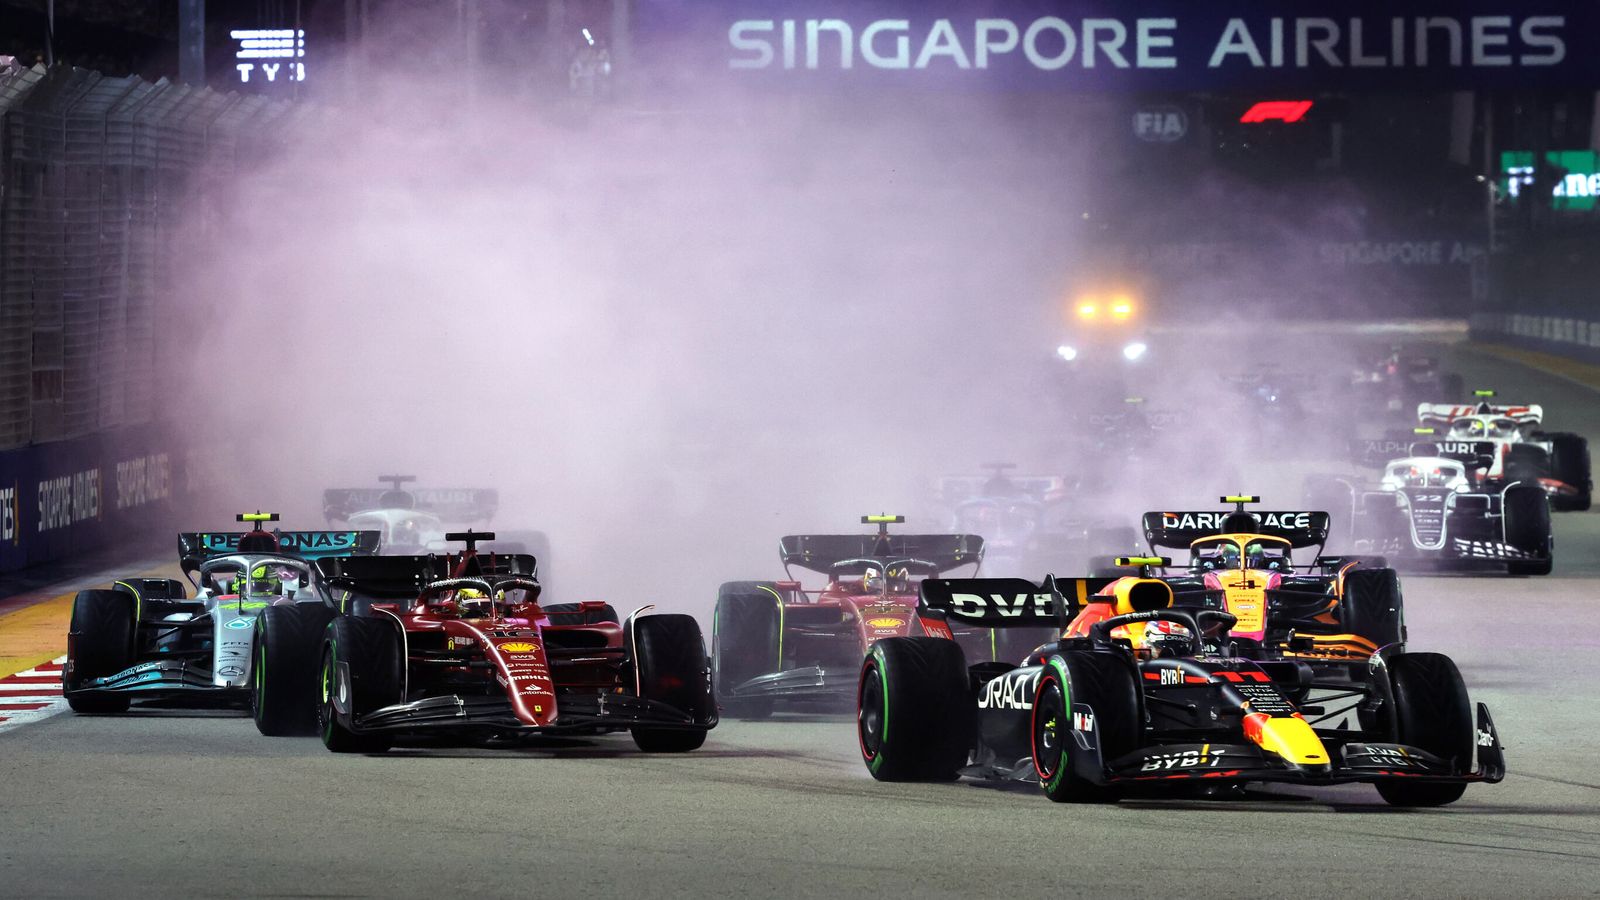 'Like riding a bike in a sauna' - surprises possible at brutal Singapore GP